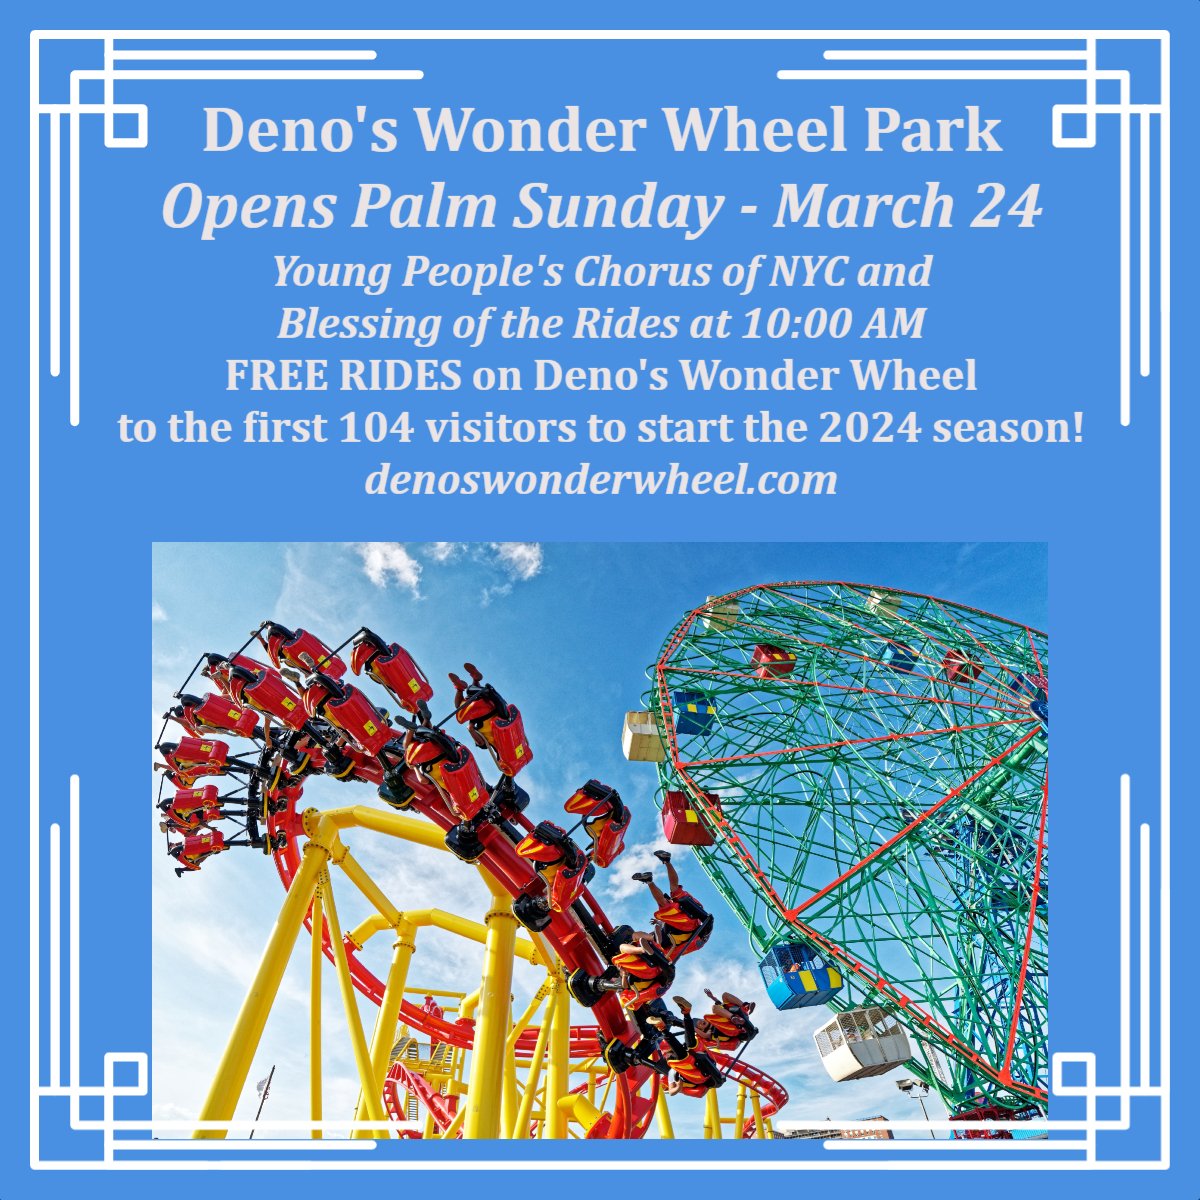 See you Sunday at 10 AM in Coney Island for the Blessing of the Rides at Deno's Wonder Wheel Park! 🎡🎢🎠 #PalmSunday #OpeningDay